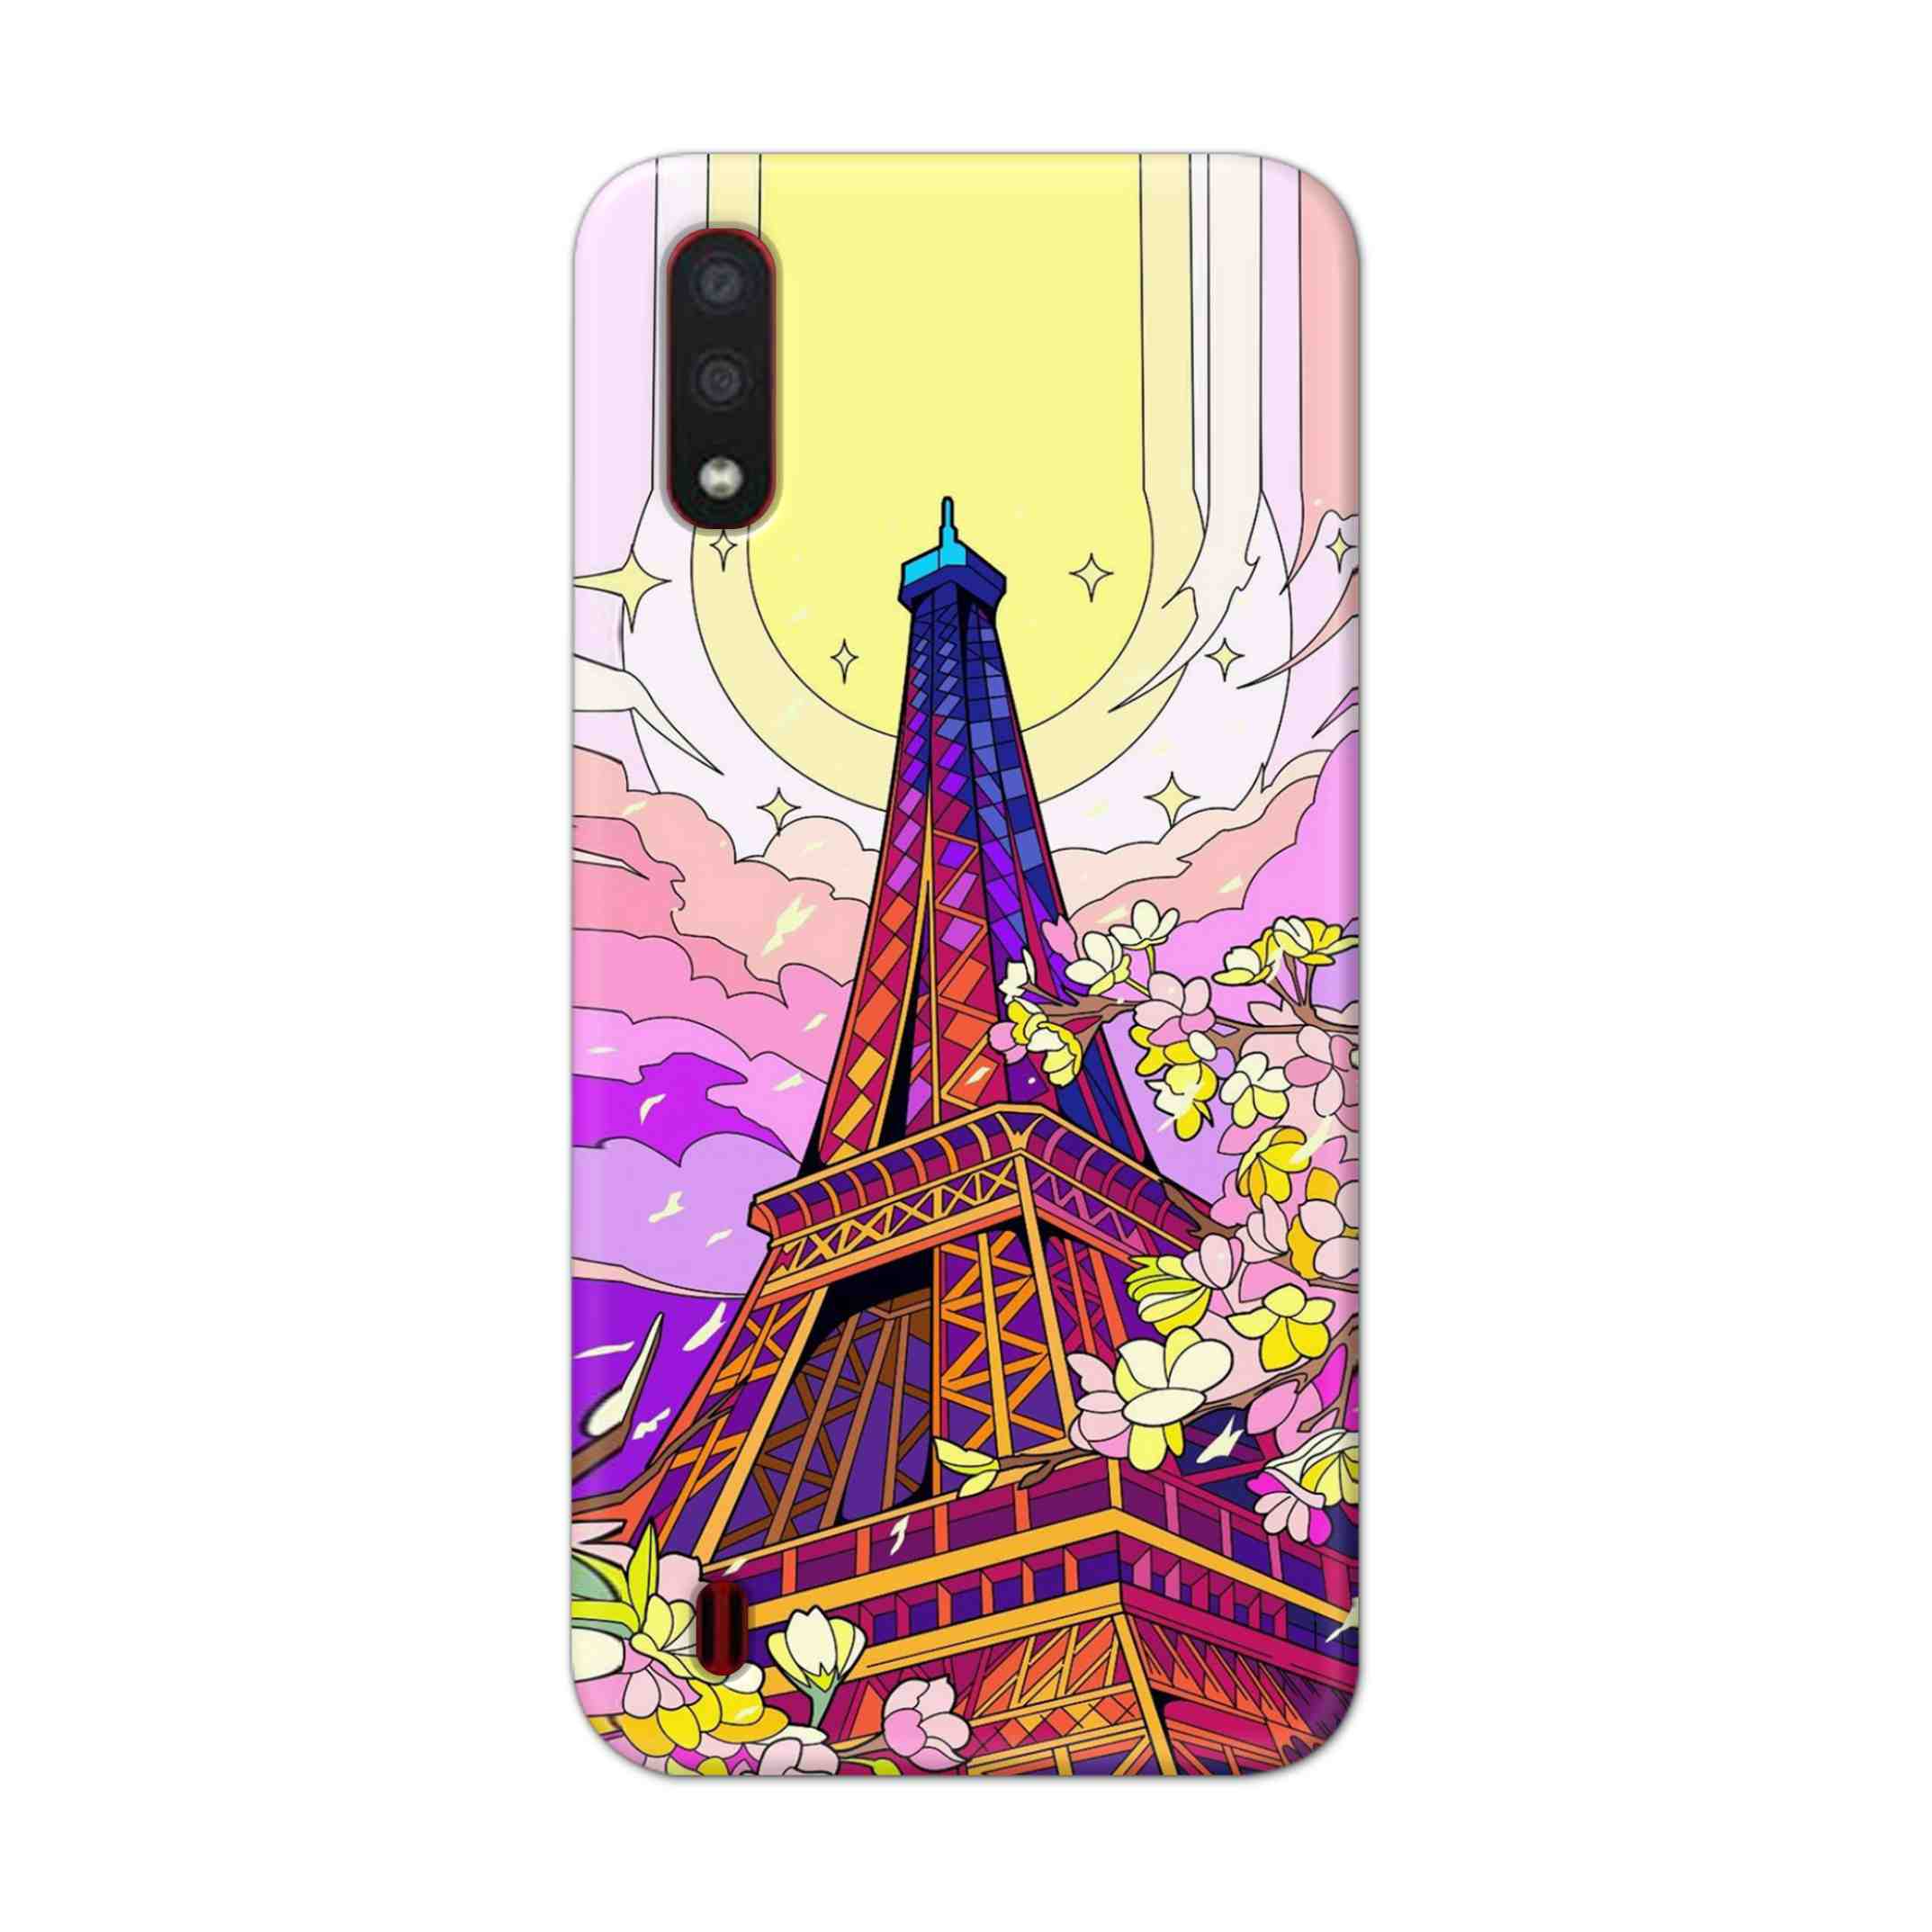 Buy Eiffl Tower Hard Back Mobile Phone Case/Cover For Samsung Galaxy M01 Online